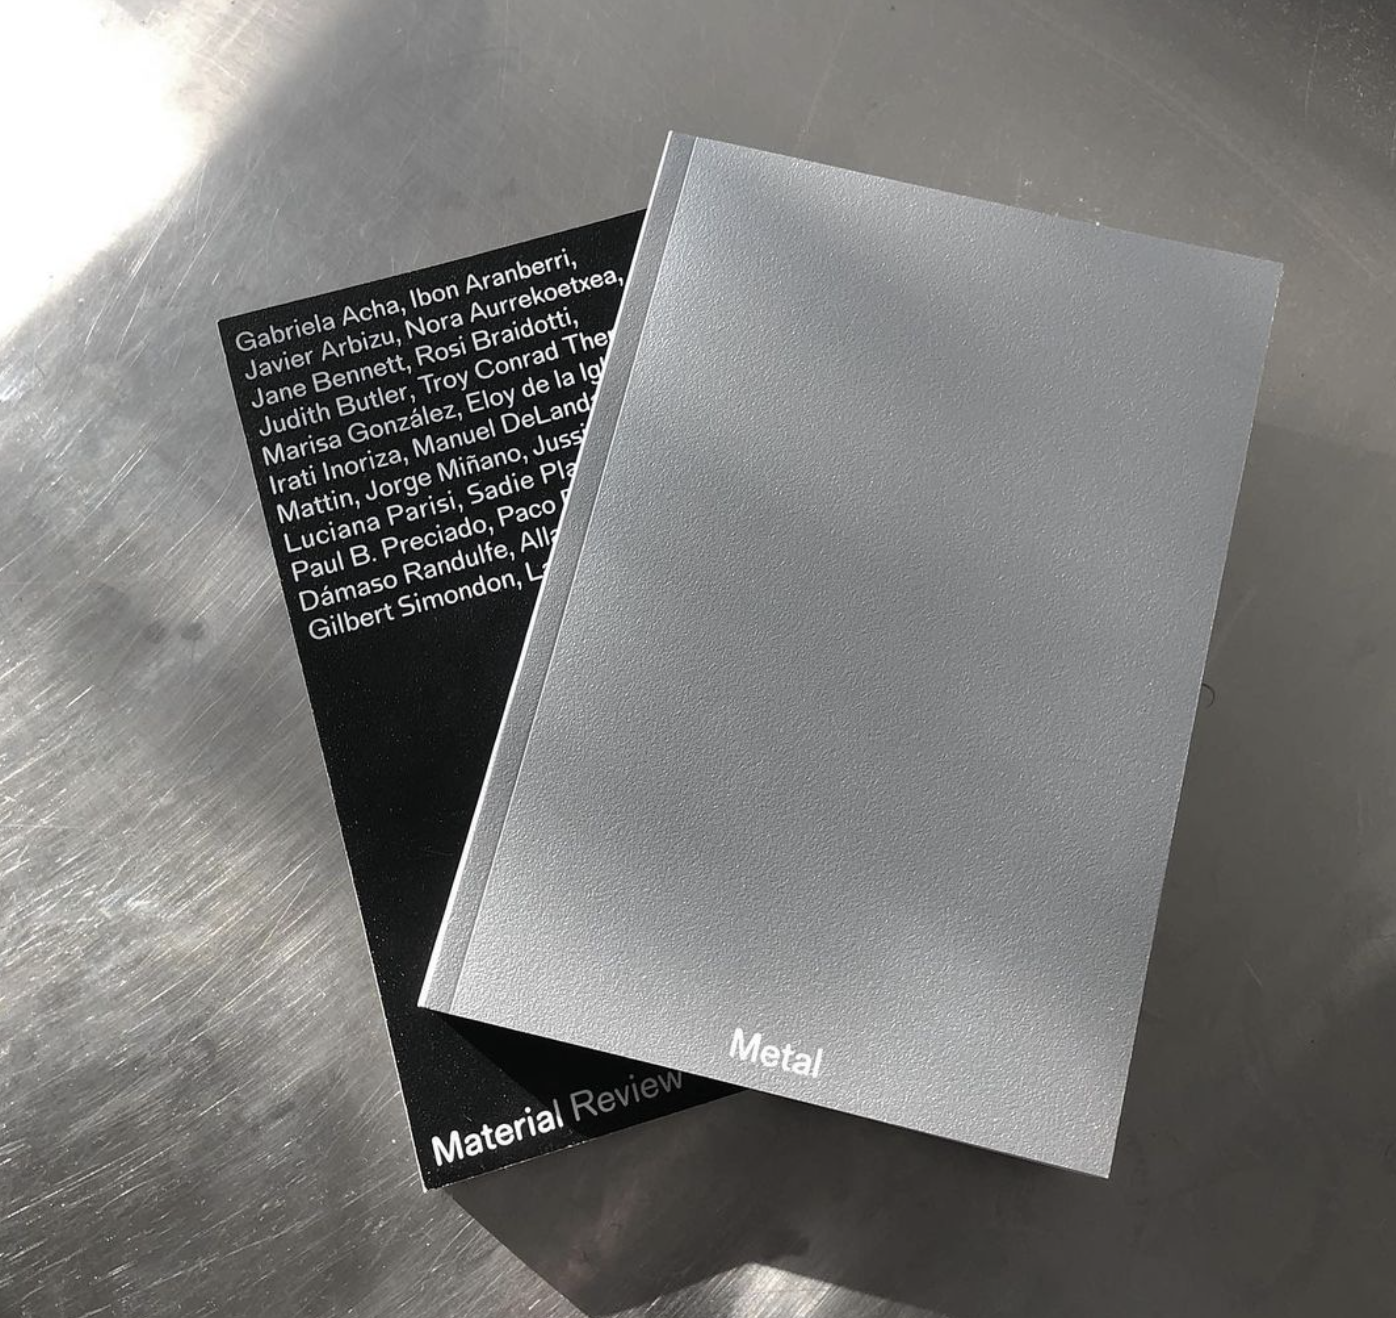 METAL | publication | published by Material Review